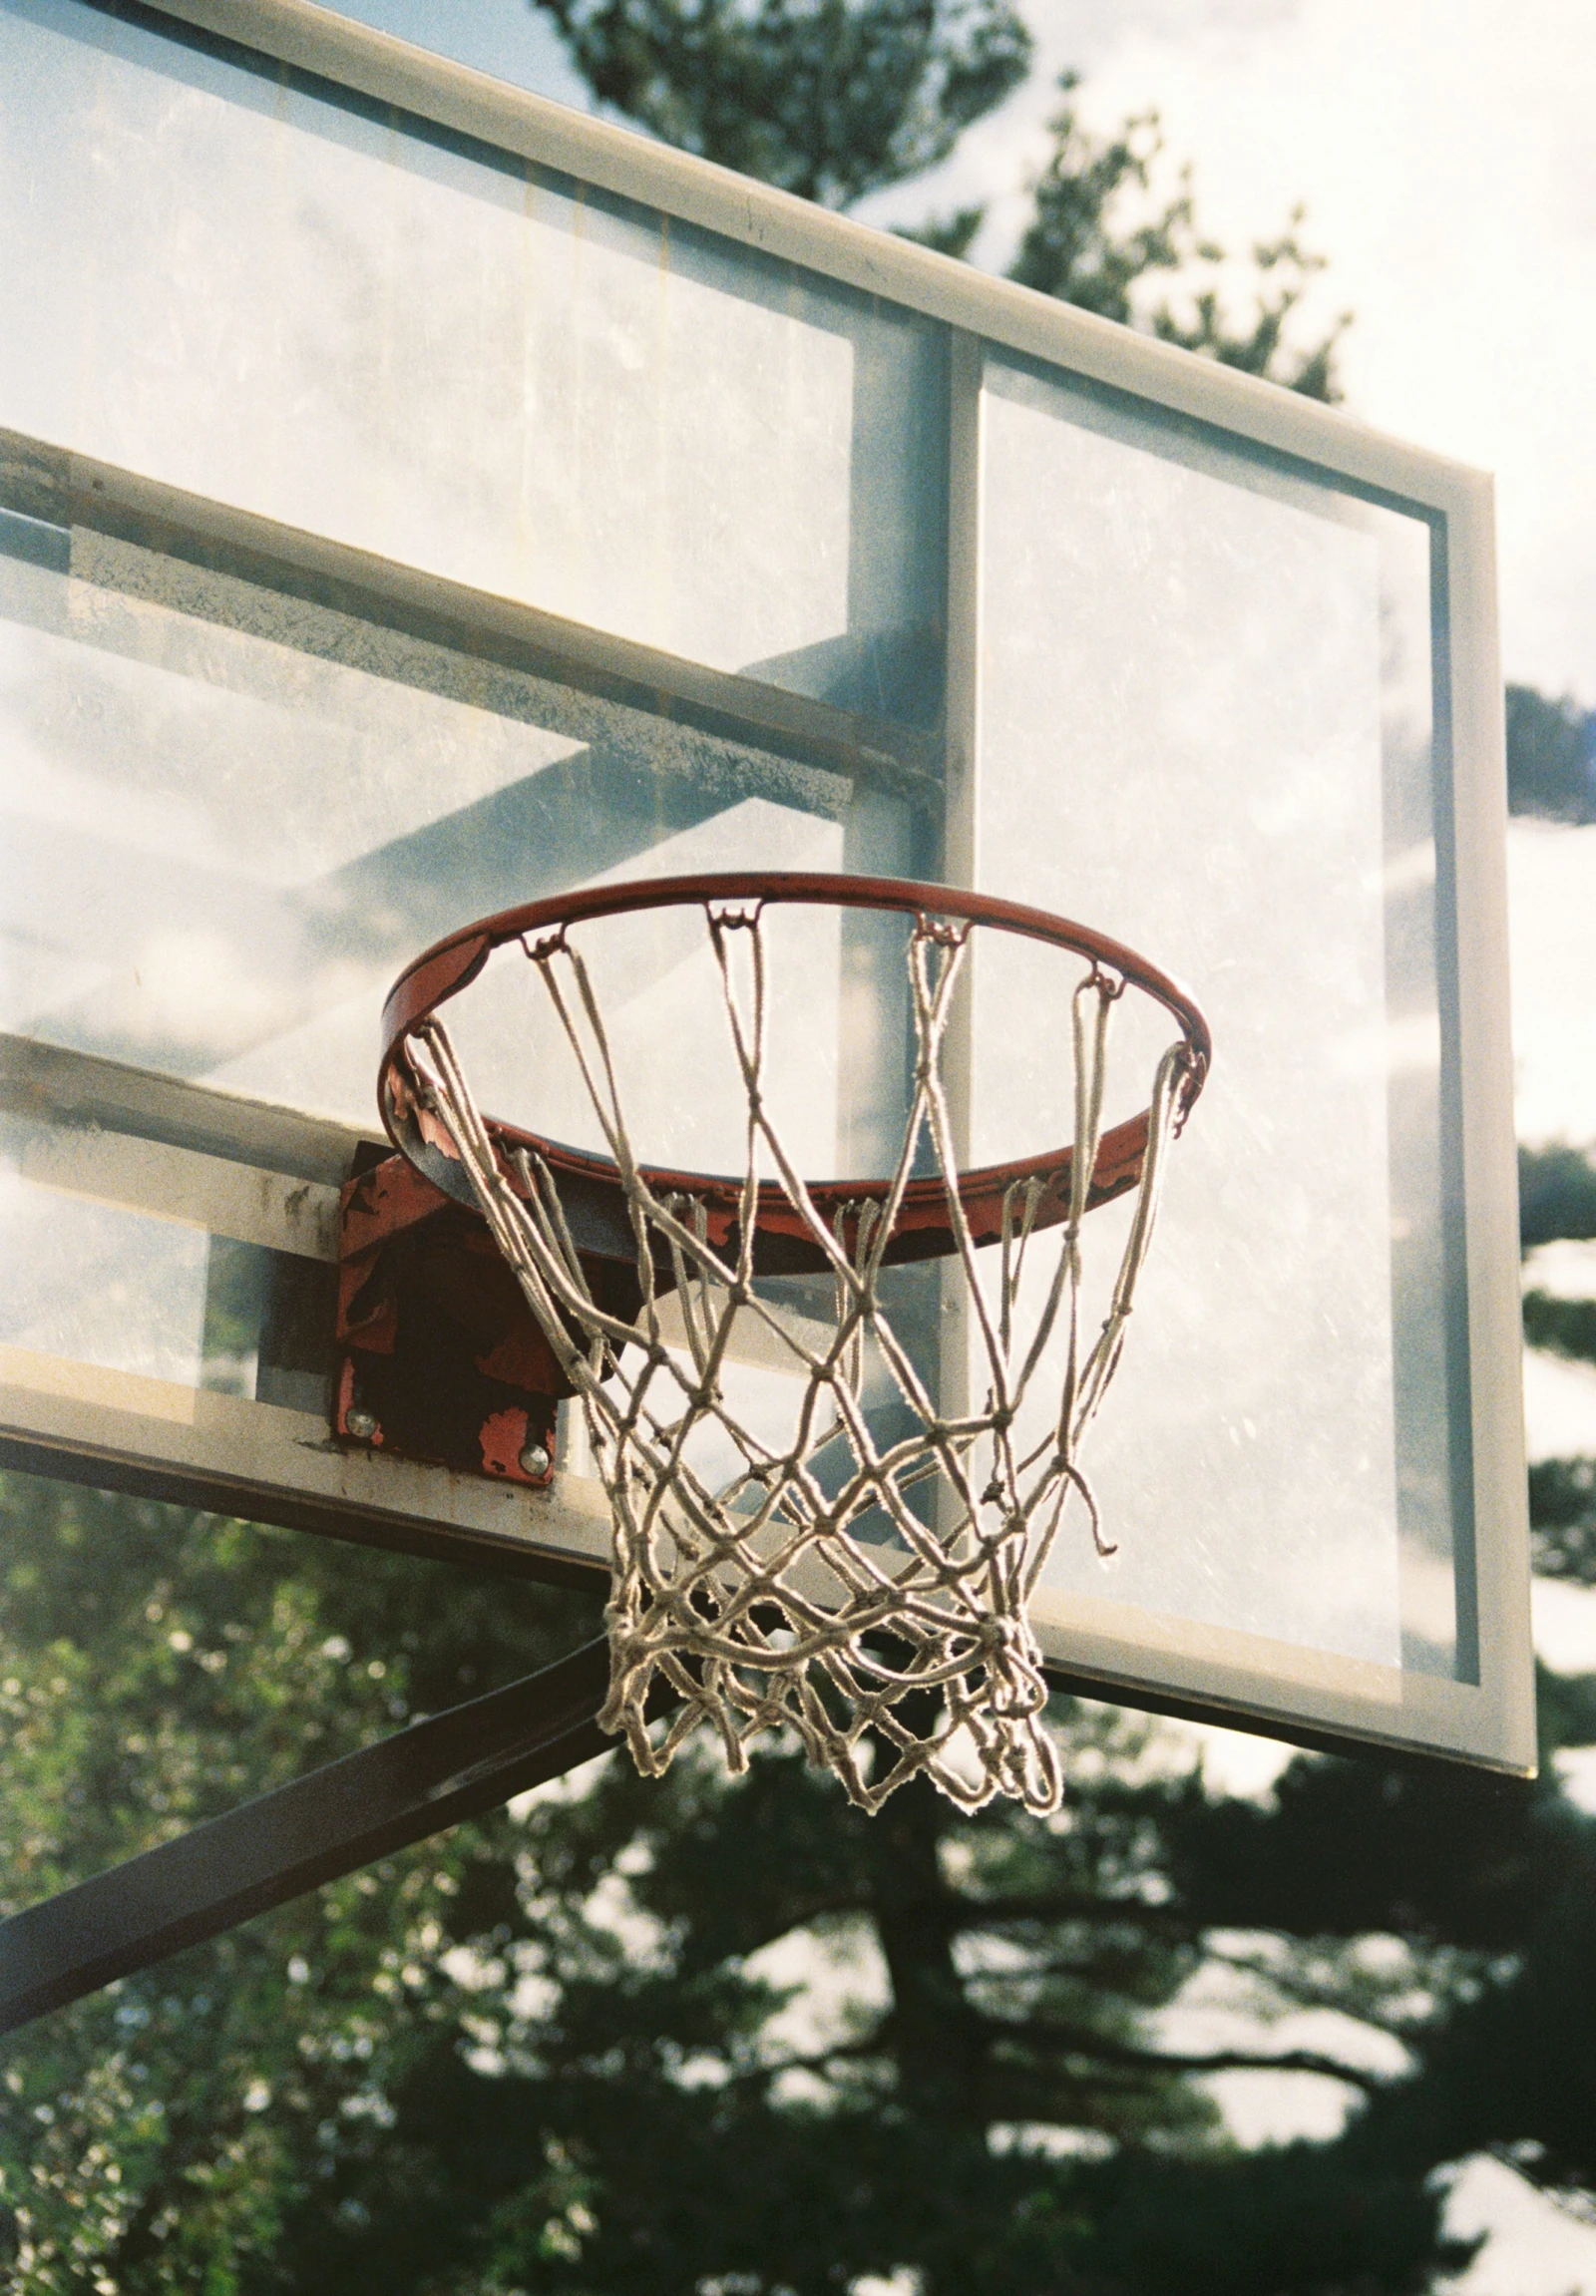 a basketball hoop that is open on a basketball court